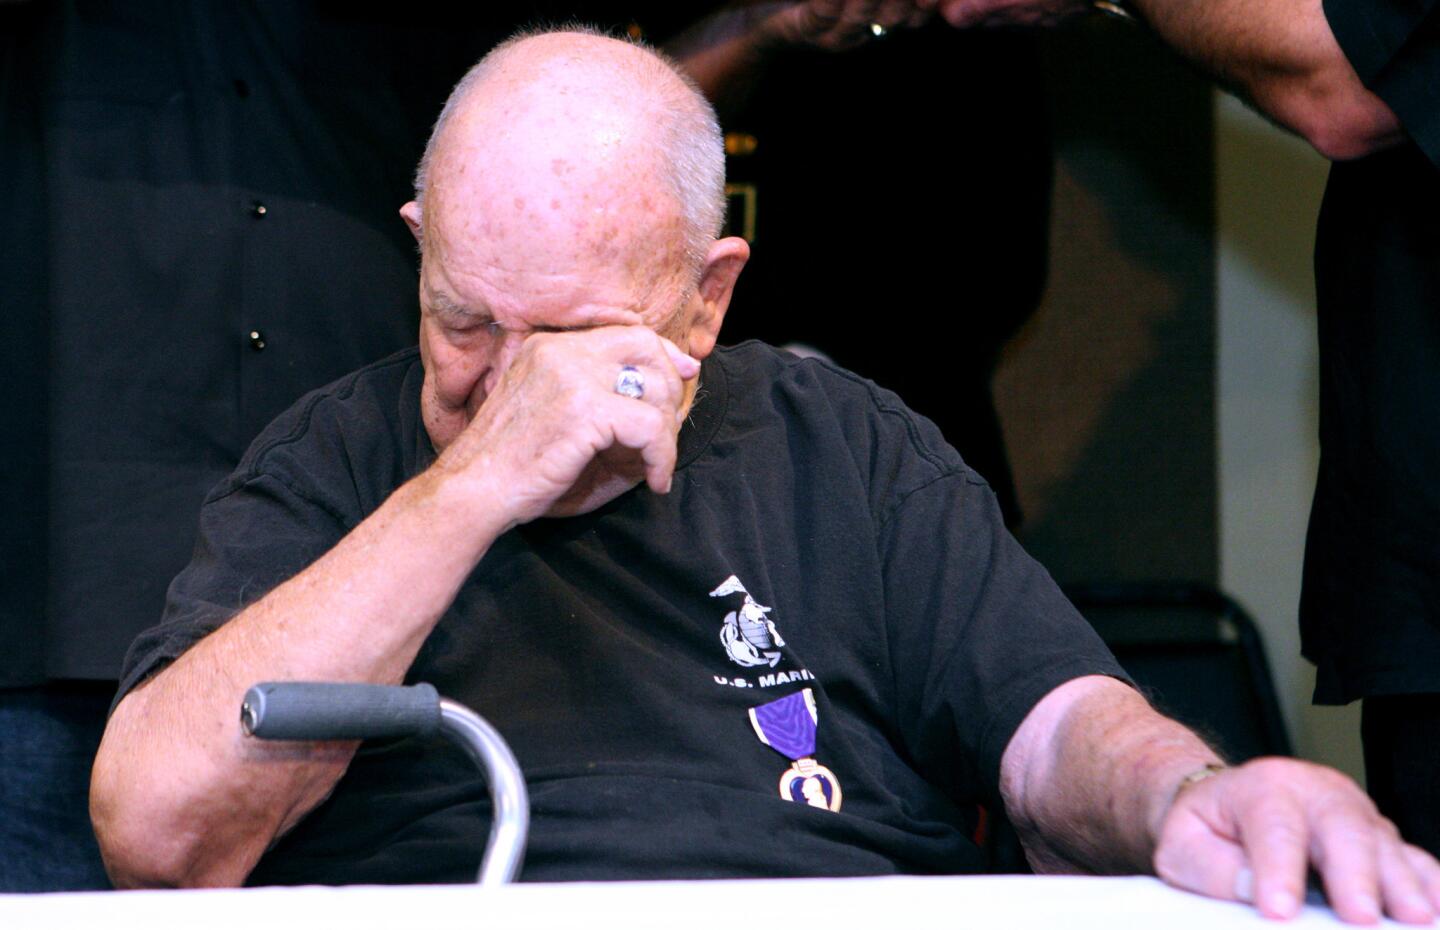 Retired United States Marine Corps Corporal Samuel Leland Anderson, Jr., 91 of Woodland Hills, wipes tears after receiving the Purple Heart during ceremony at Henri's Coffee Shop in Canoga Park on Thursday, Feb. 9, 2017. Anderson Jr., who was wounded on March 11, 1945, after 21 days of intense fighting at Iwo Jima, Japan, during World War II, is the father of retired Glendale police Lt. Todd Anderson.